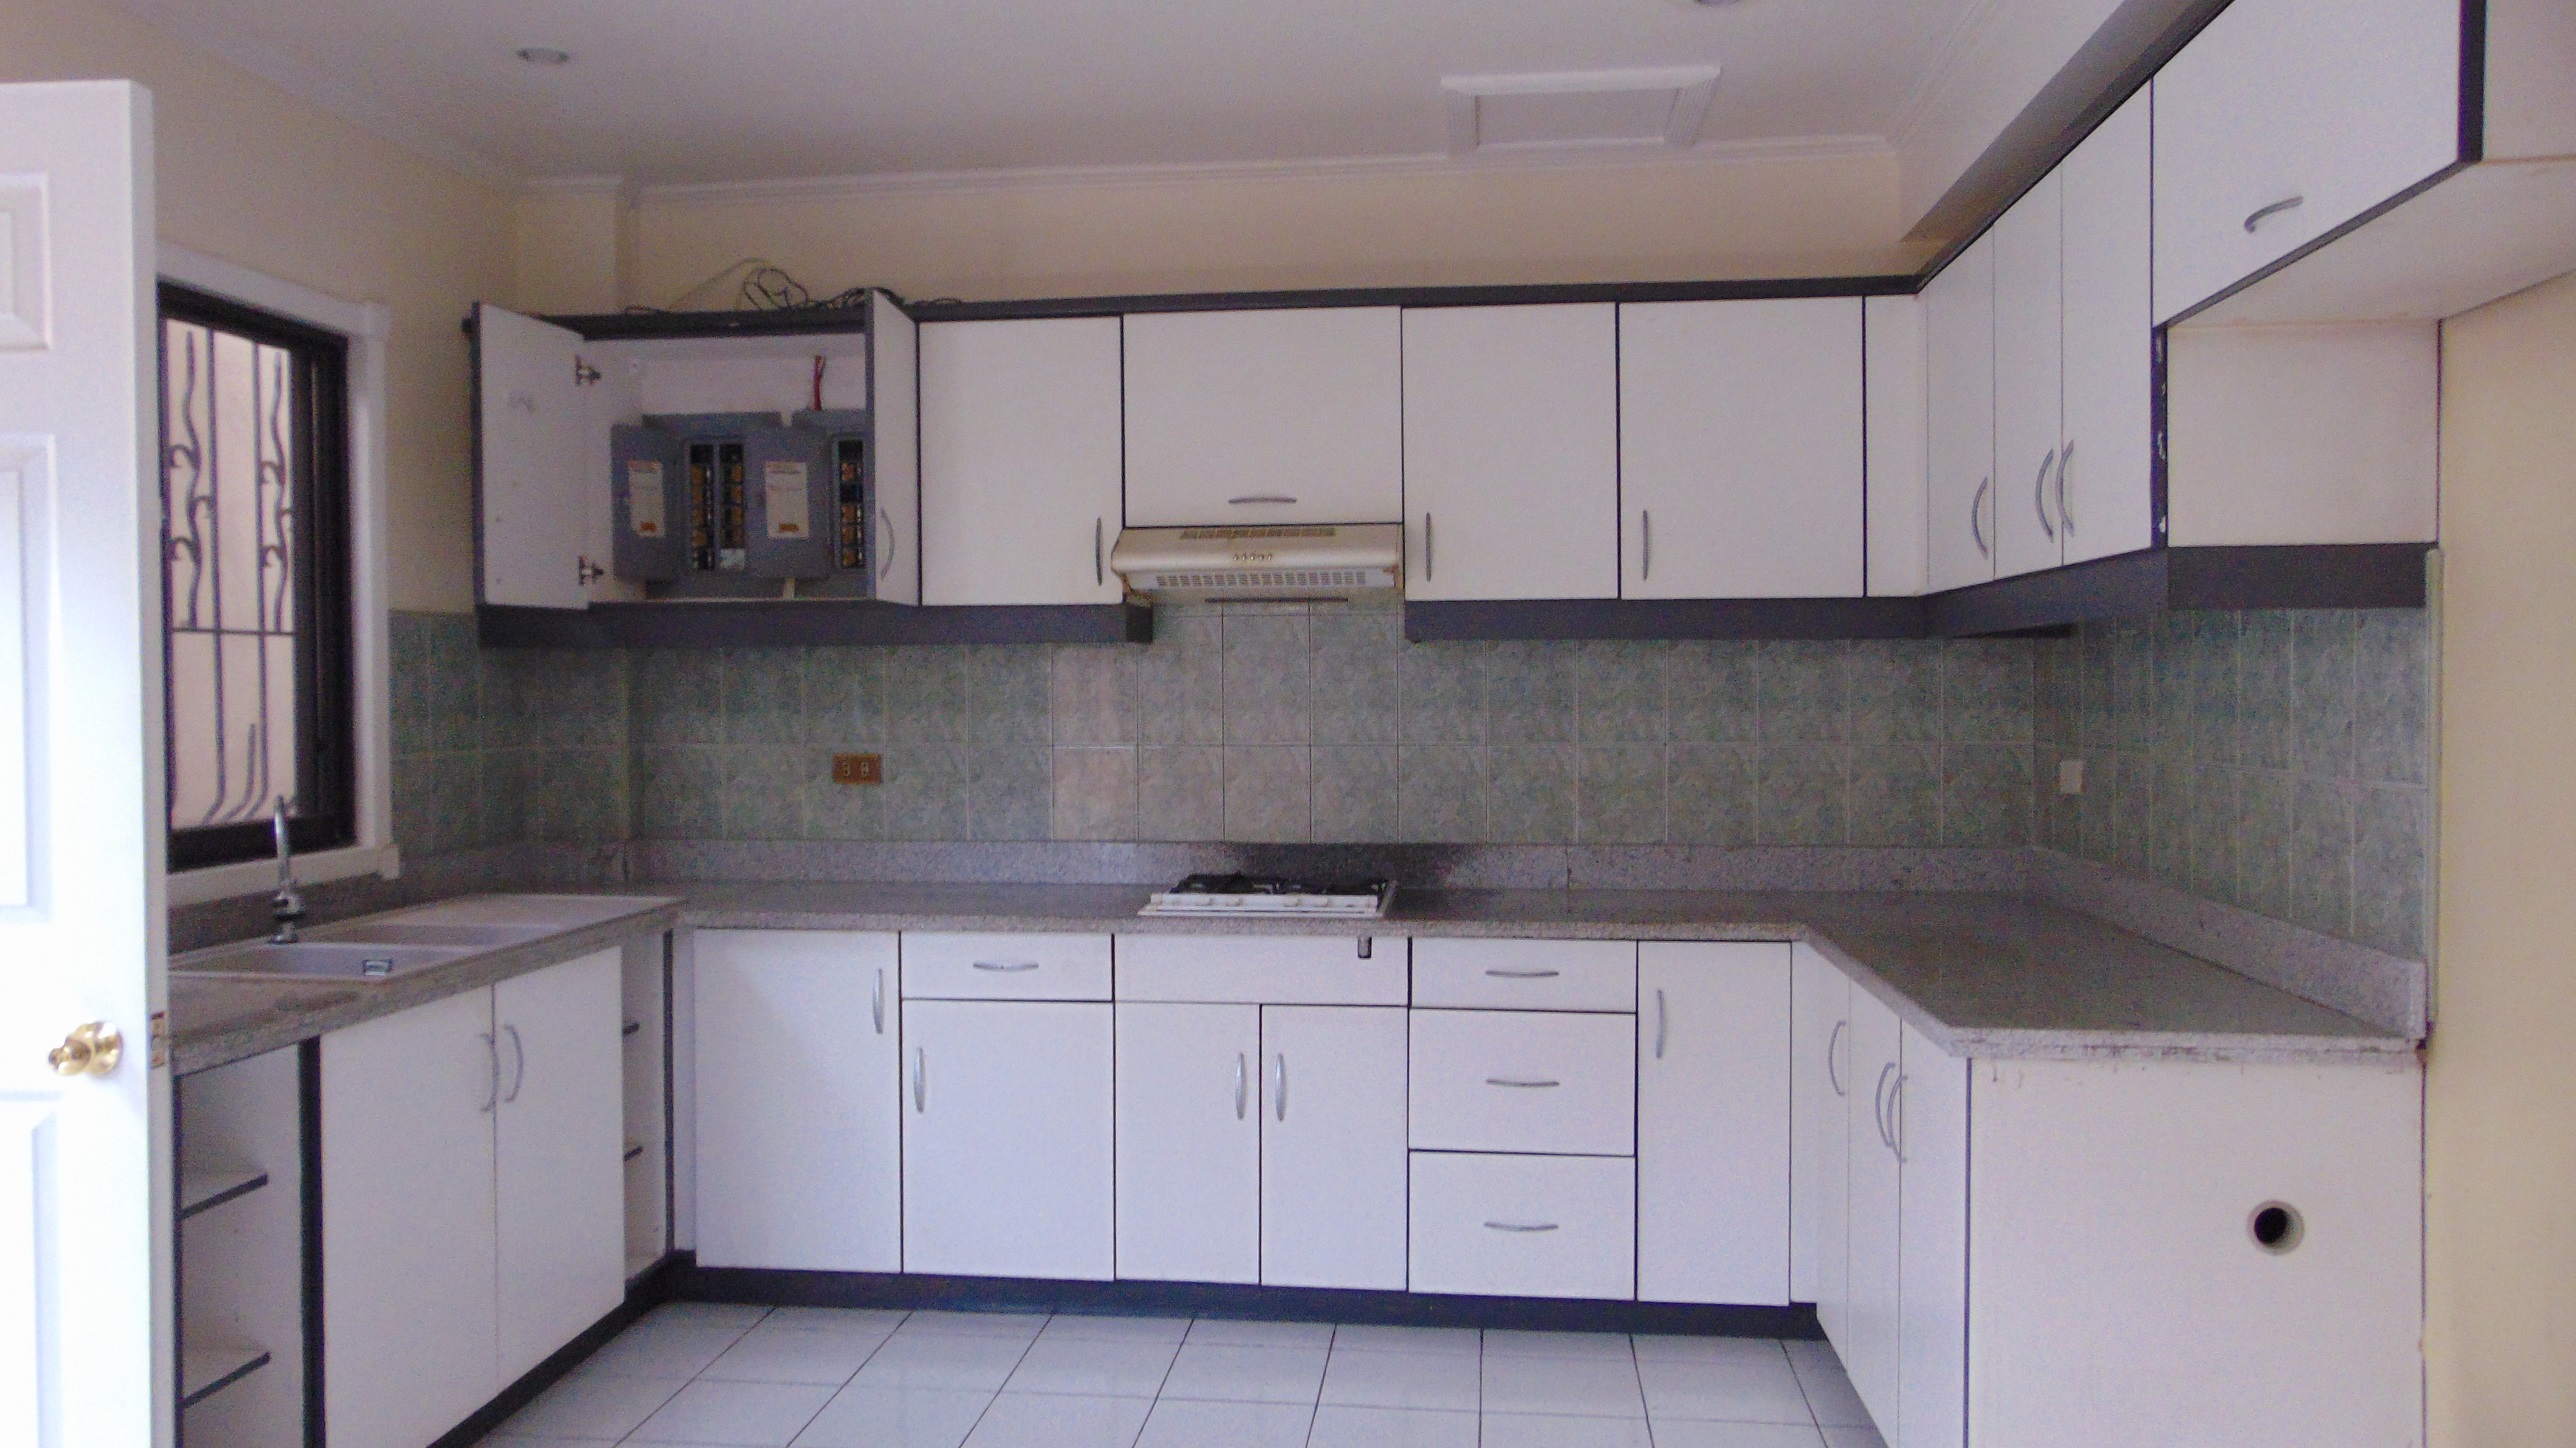 4-bedrooms-semi-furnished-house-located-in-banilad-cebu-city